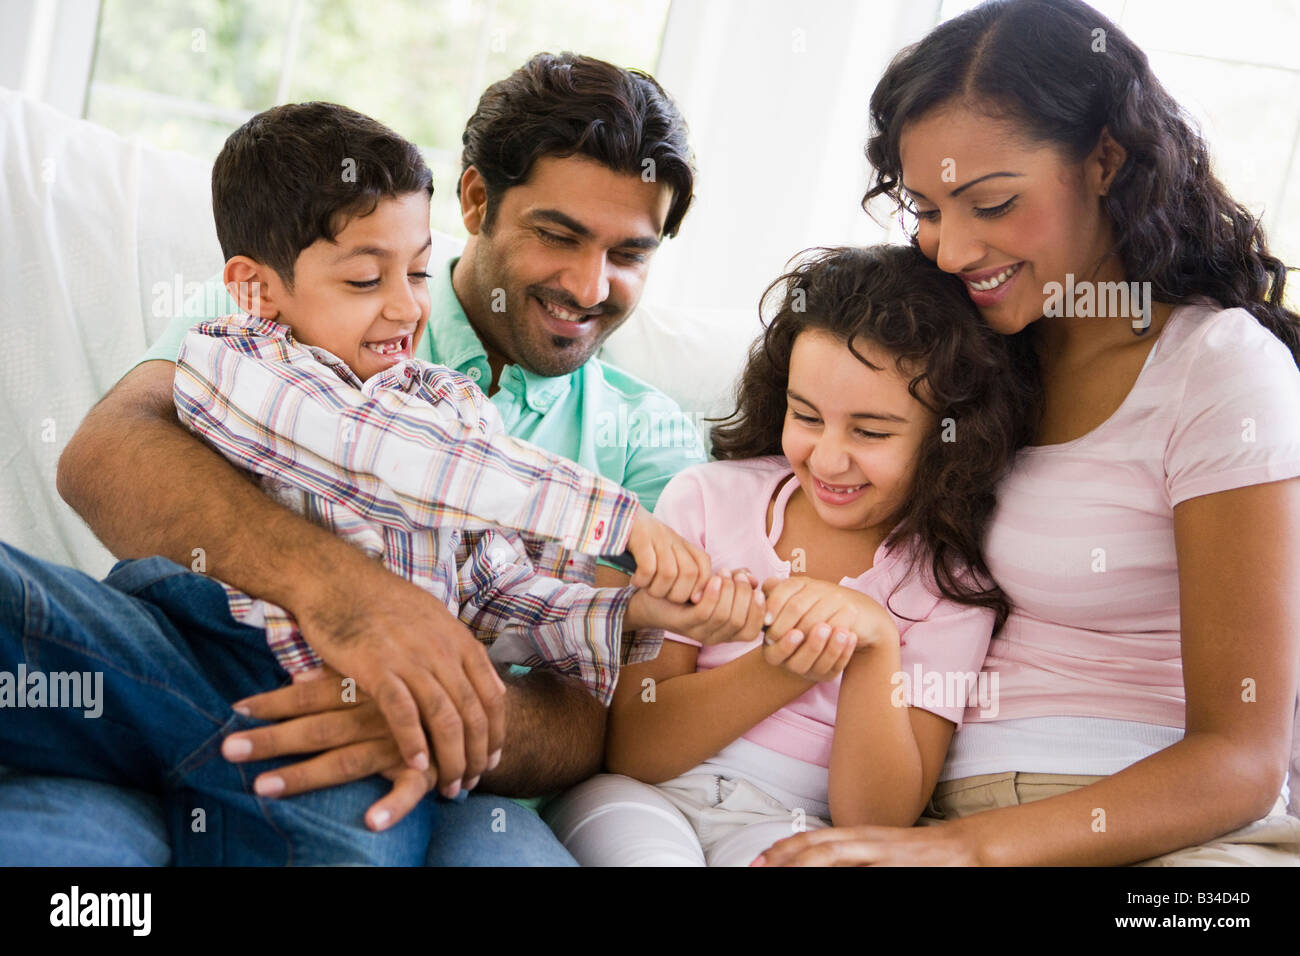 Family in living room fighting over remote control smiling (high key) Stock Photo